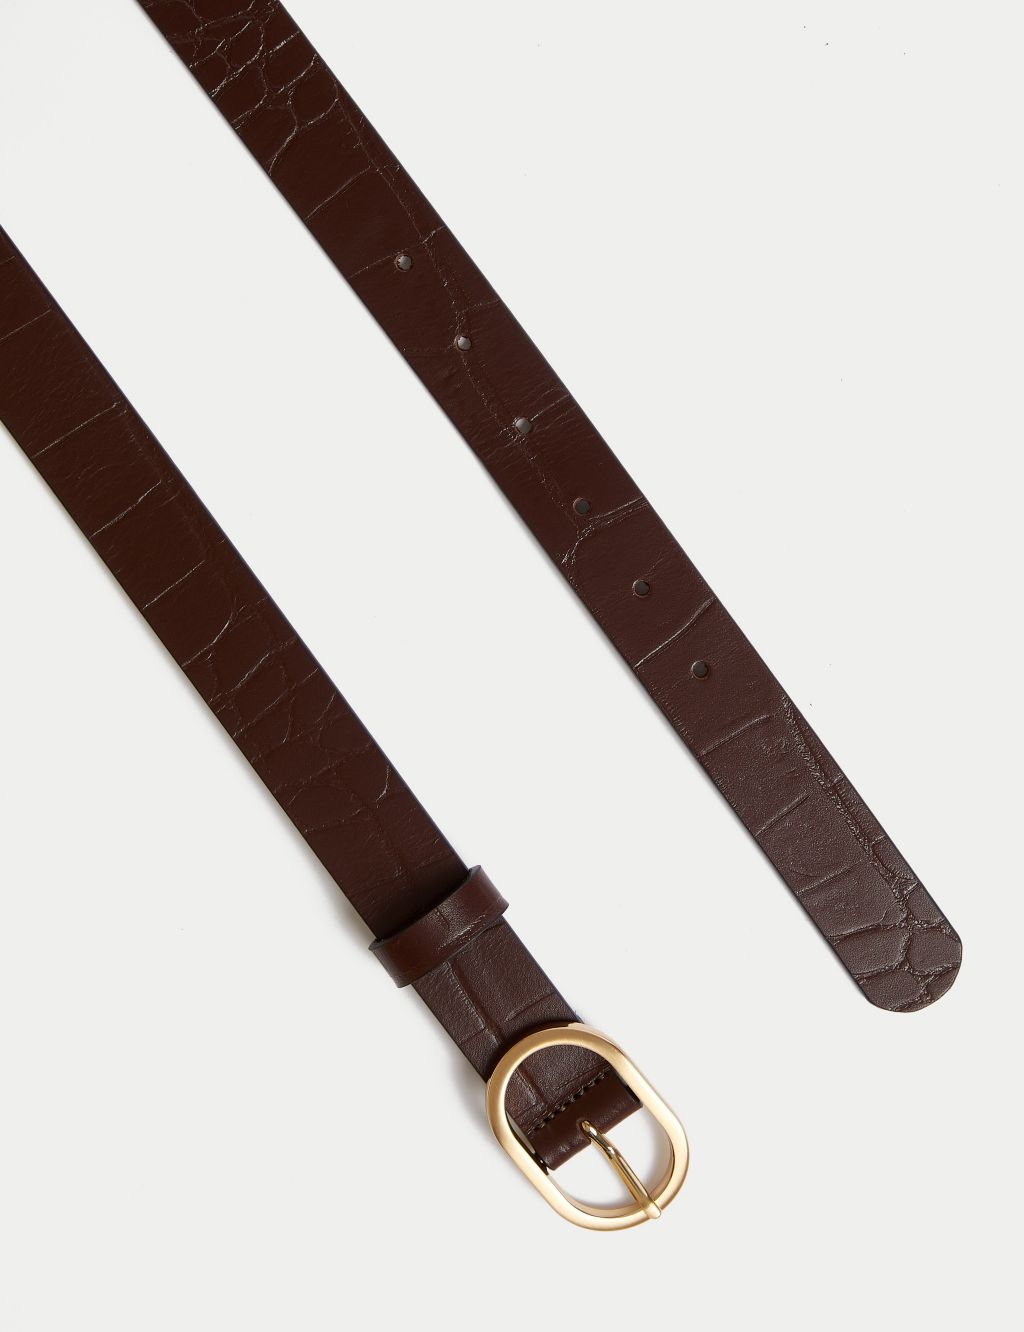 Leather belt - WC010 - Brown, M